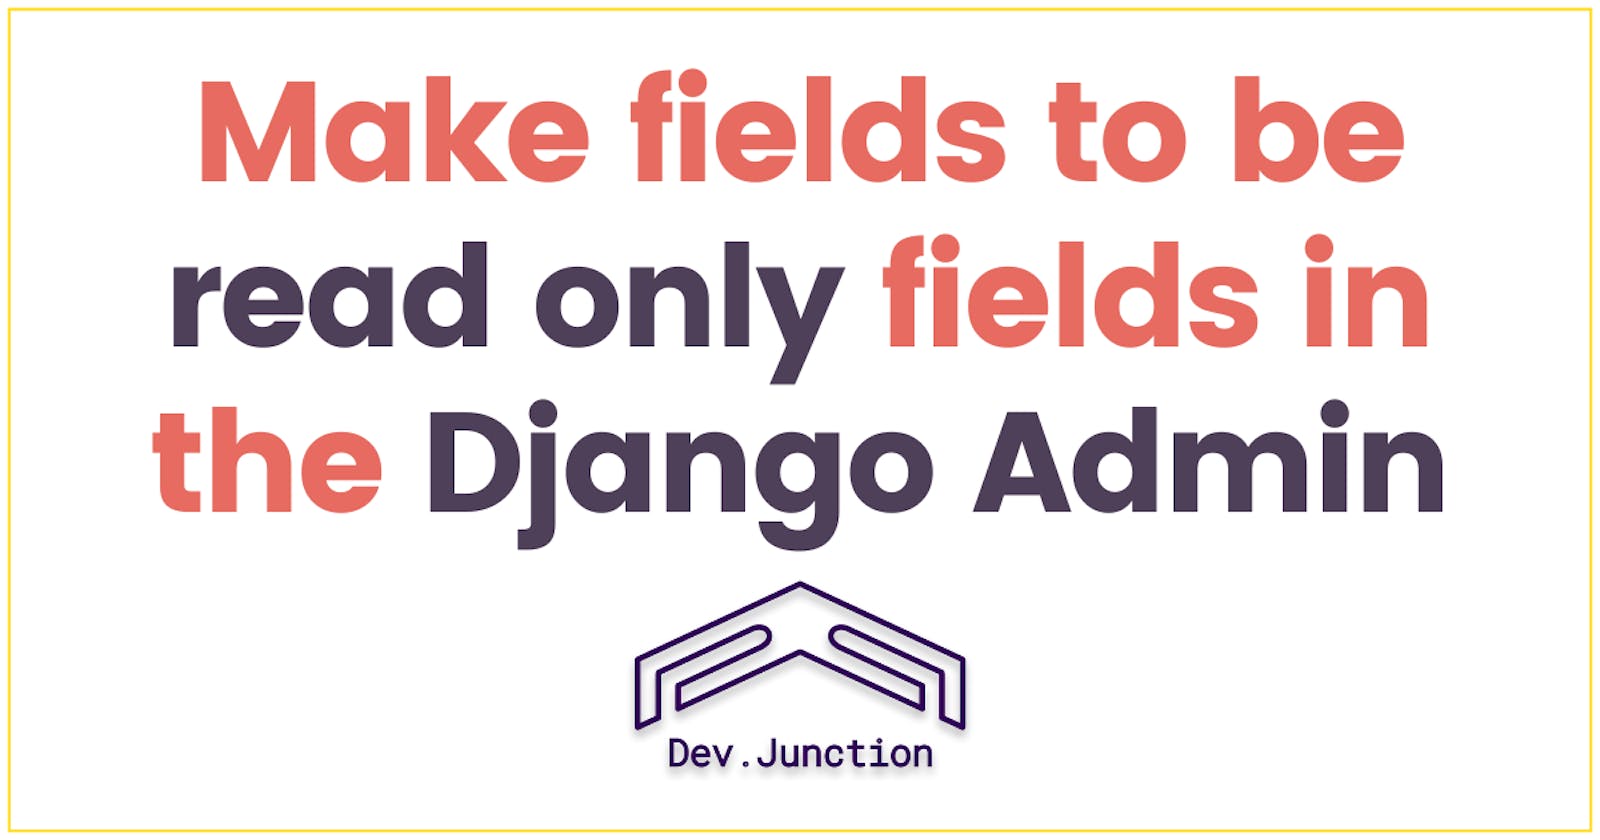 How to make fields to be read only fields in the Django model admin forms?